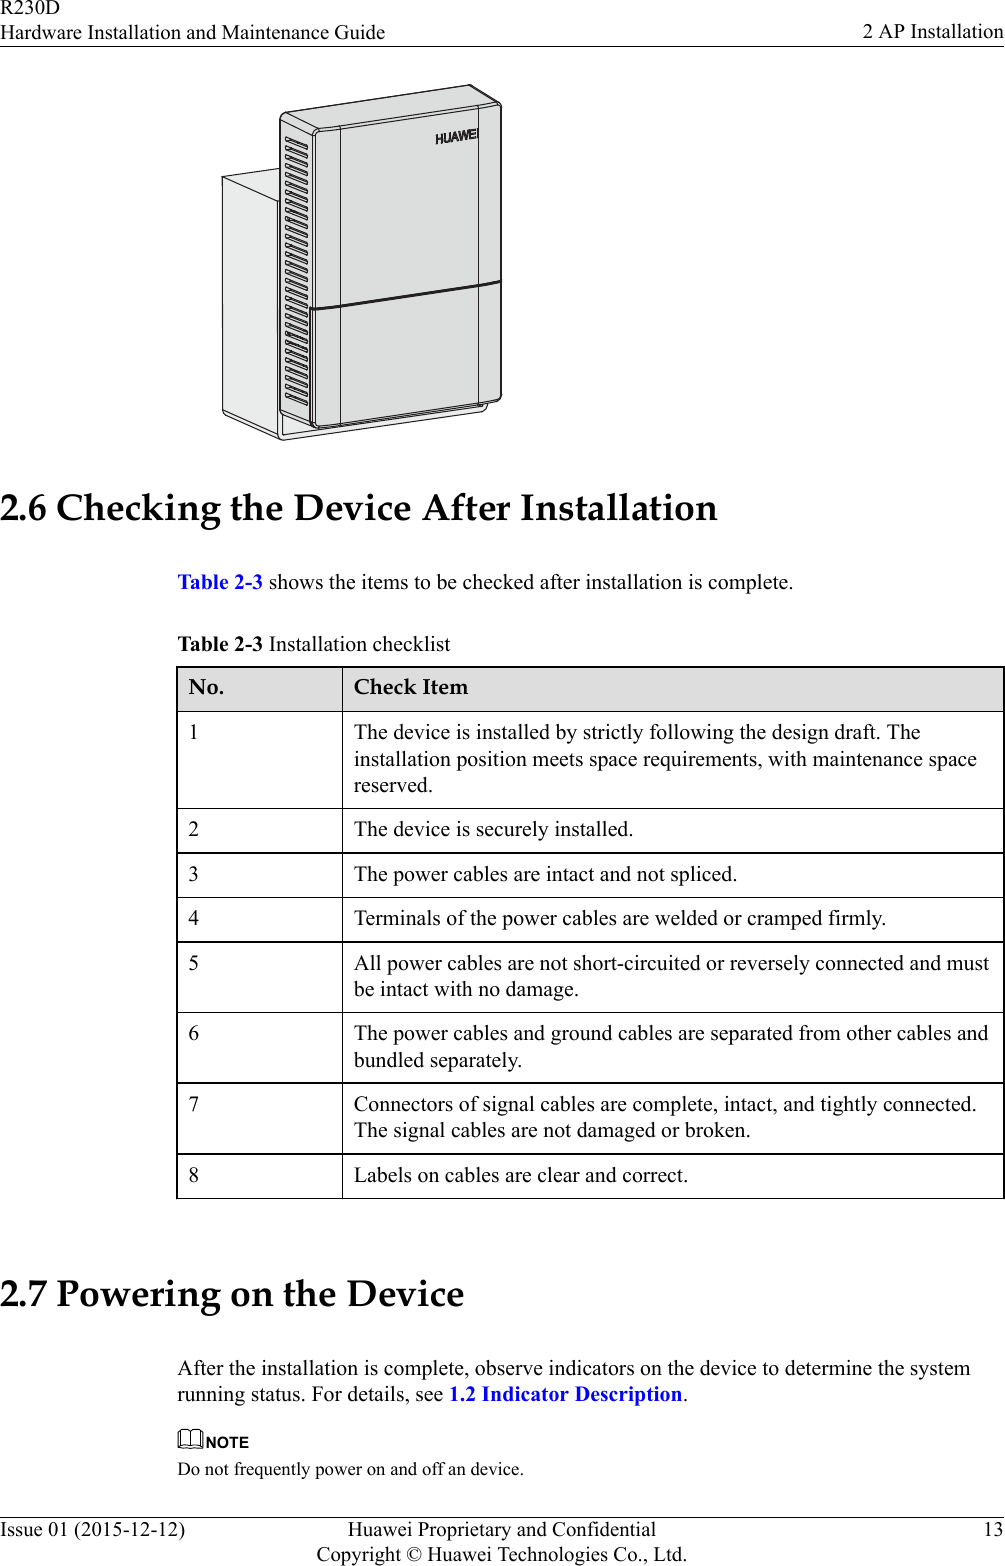 2.6 Checking the Device After InstallationTable 2-3 shows the items to be checked after installation is complete.Table 2-3 Installation checklistNo. Check Item1 The device is installed by strictly following the design draft. Theinstallation position meets space requirements, with maintenance spacereserved.2 The device is securely installed.3 The power cables are intact and not spliced.4 Terminals of the power cables are welded or cramped firmly.5 All power cables are not short-circuited or reversely connected and mustbe intact with no damage.6 The power cables and ground cables are separated from other cables andbundled separately.7 Connectors of signal cables are complete, intact, and tightly connected.The signal cables are not damaged or broken.8 Labels on cables are clear and correct. 2.7 Powering on the DeviceAfter the installation is complete, observe indicators on the device to determine the systemrunning status. For details, see 1.2 Indicator Description.NOTEDo not frequently power on and off an device.R230DHardware Installation and Maintenance Guide 2 AP InstallationIssue 01 (2015-12-12) Huawei Proprietary and ConfidentialCopyright © Huawei Technologies Co., Ltd.13